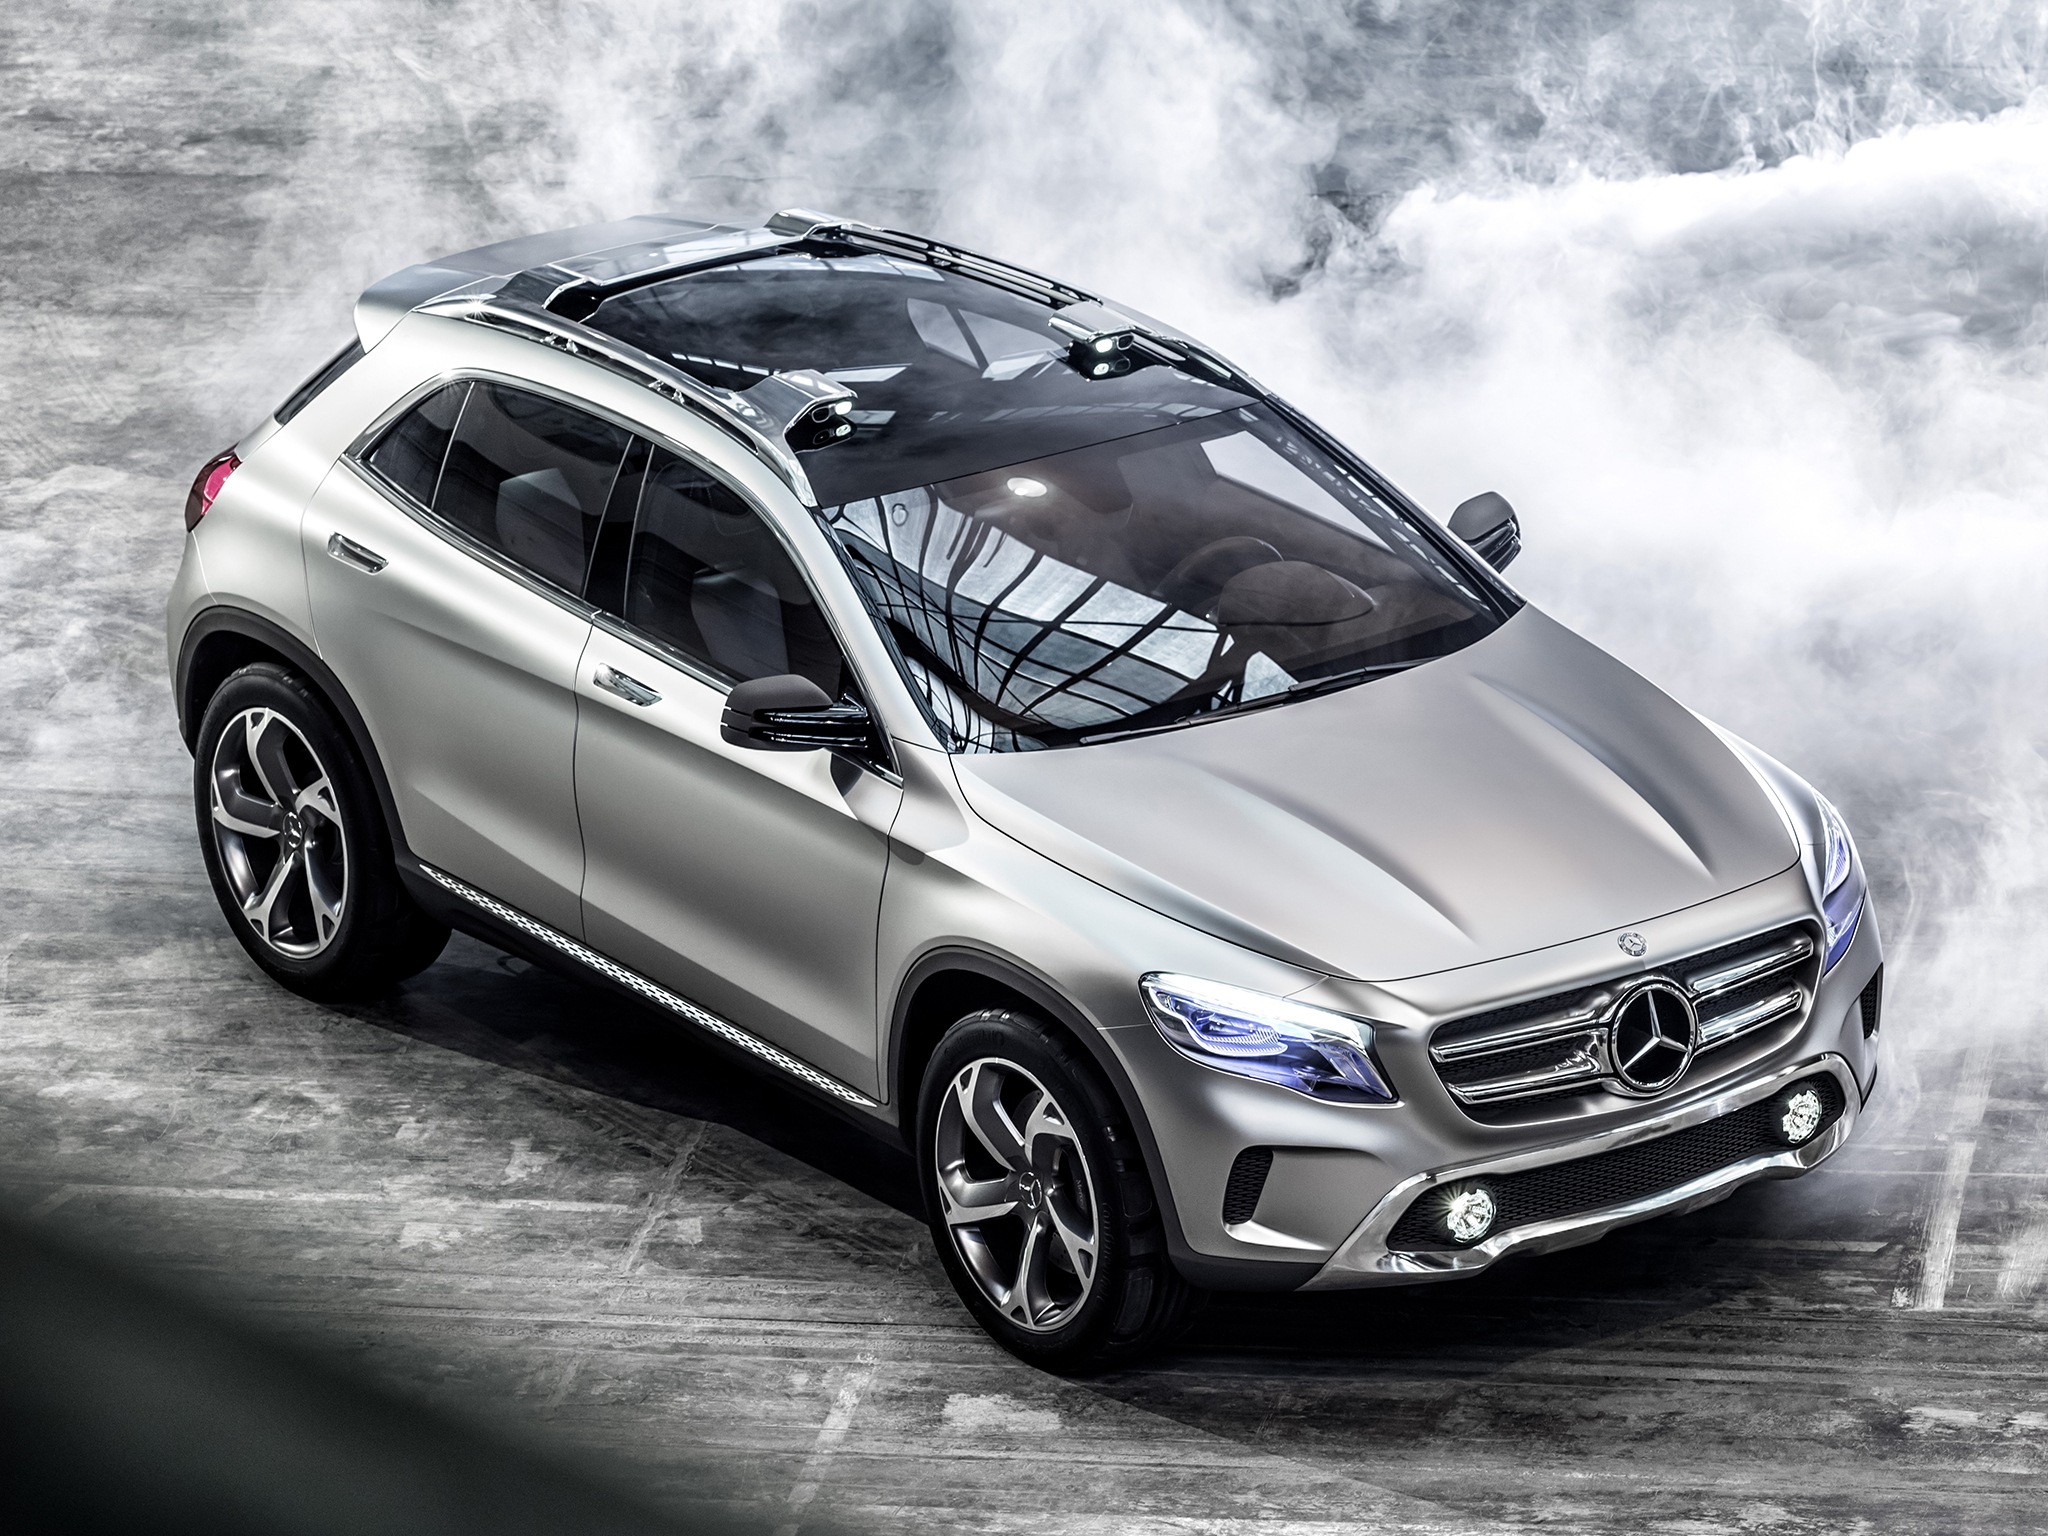 silver, cars, mercedes benz, lights, concept, headlights, silvery, crossover, glk cellphone